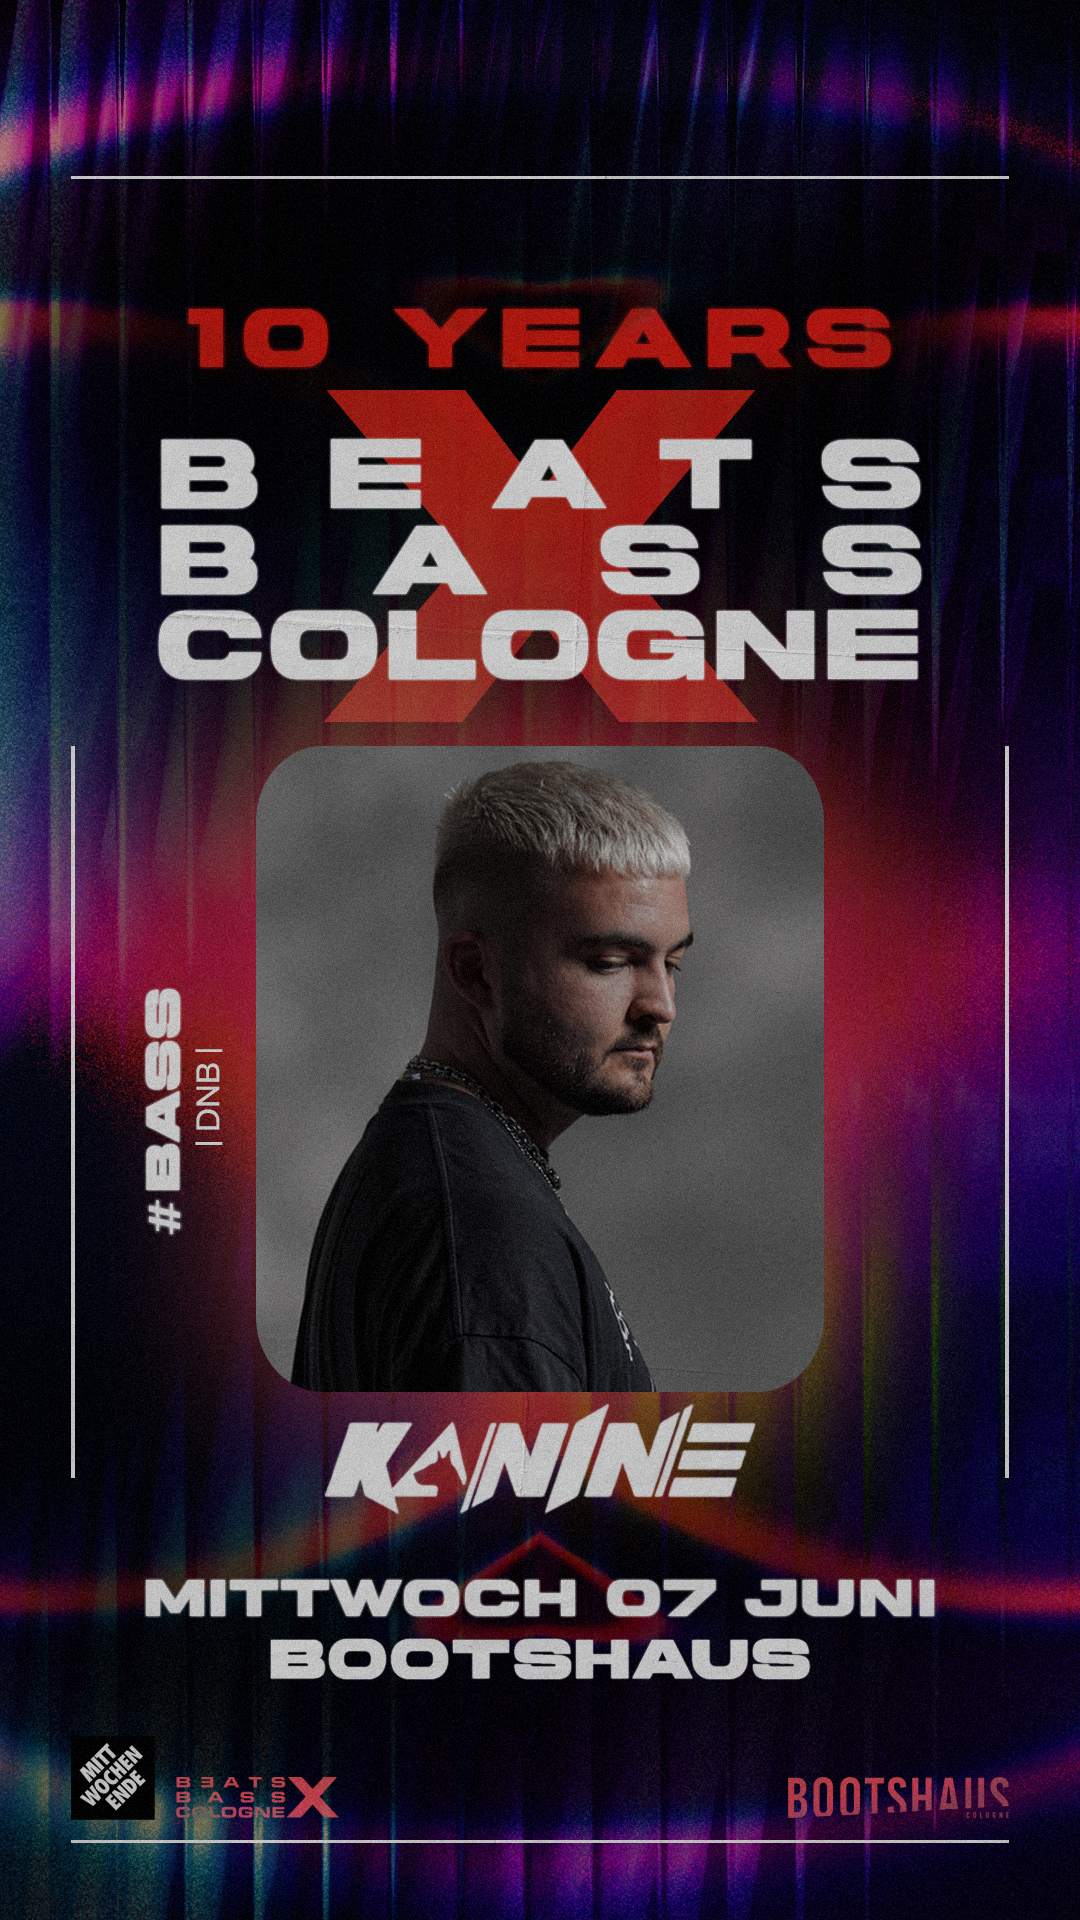 10 Years Beats x Bass x Cologne with Lilly Palmer & Kanine + Köln ist Techno Floor - フライヤー裏